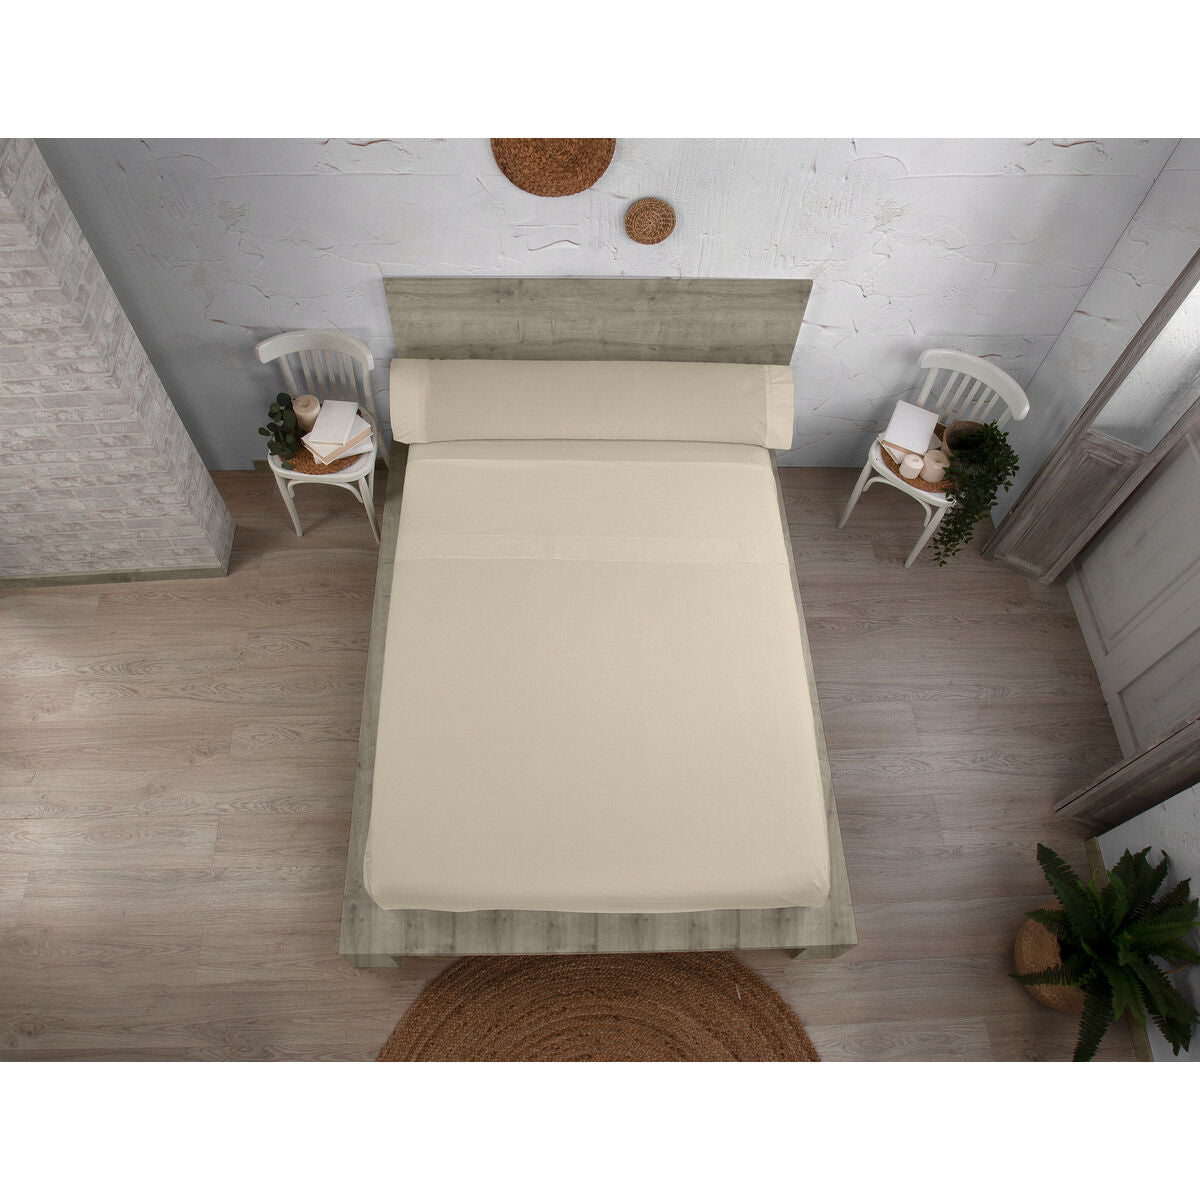 Sheet Play Alexandra House Living Quot BEIGE BED 1 Personal 3 pezzi